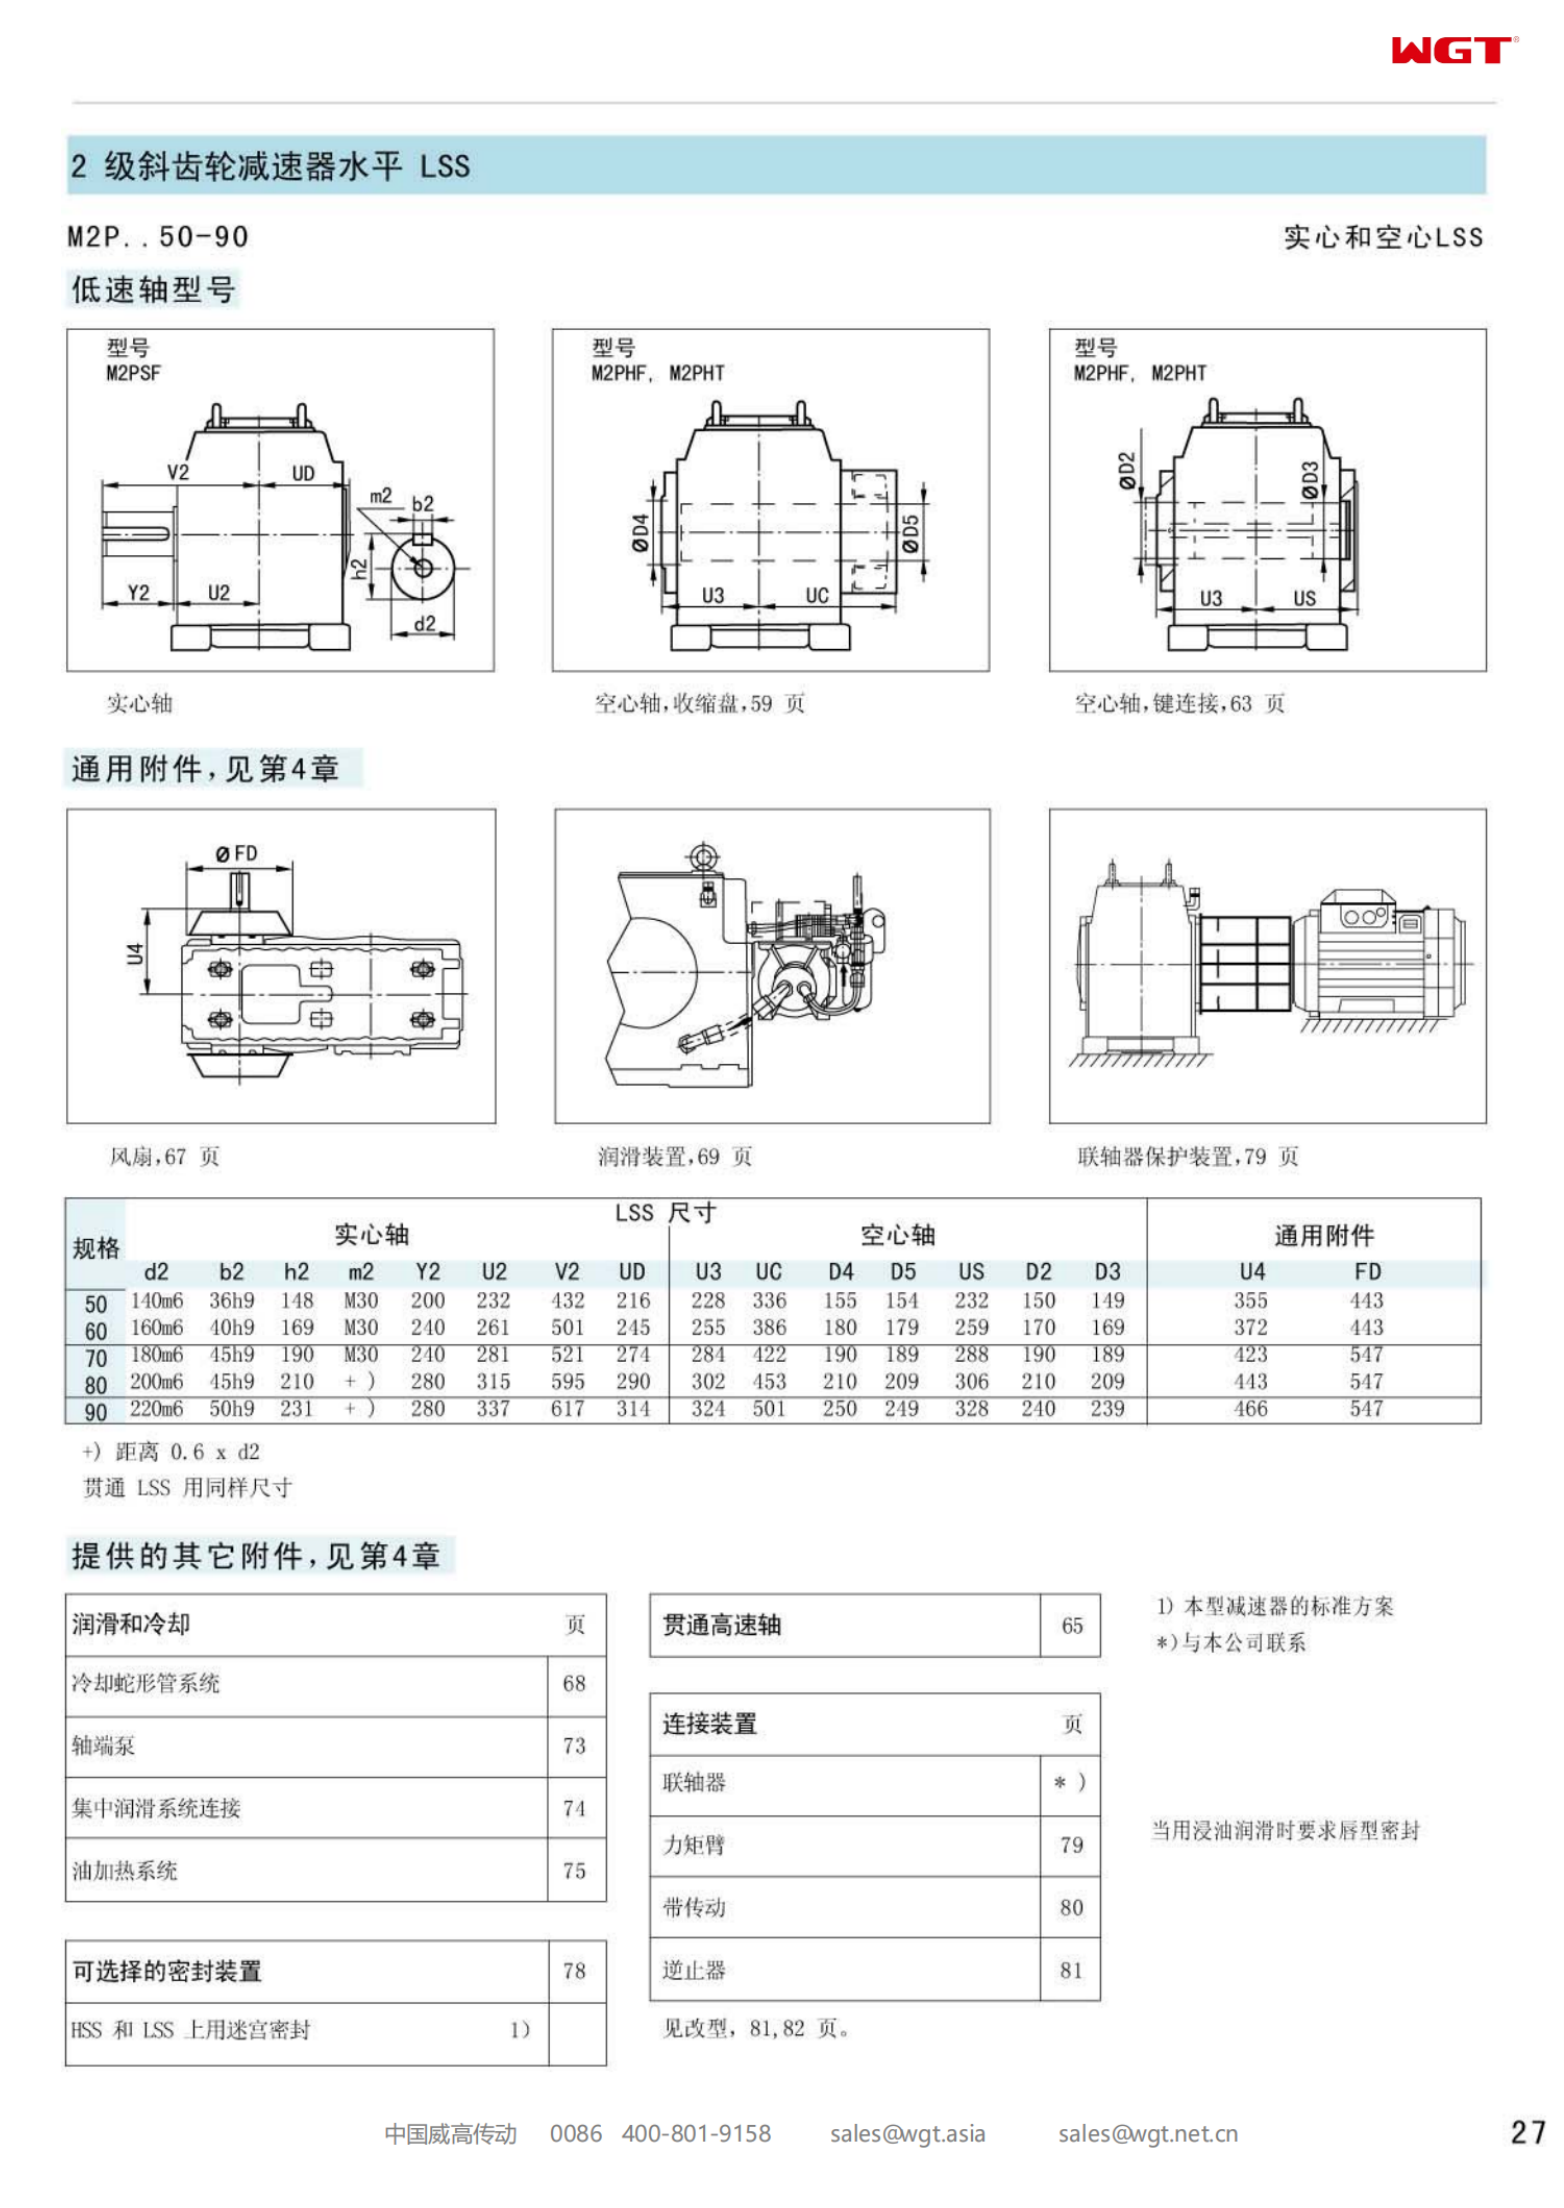 M2PHT80 Replace_SEW_M_Series Gearbox